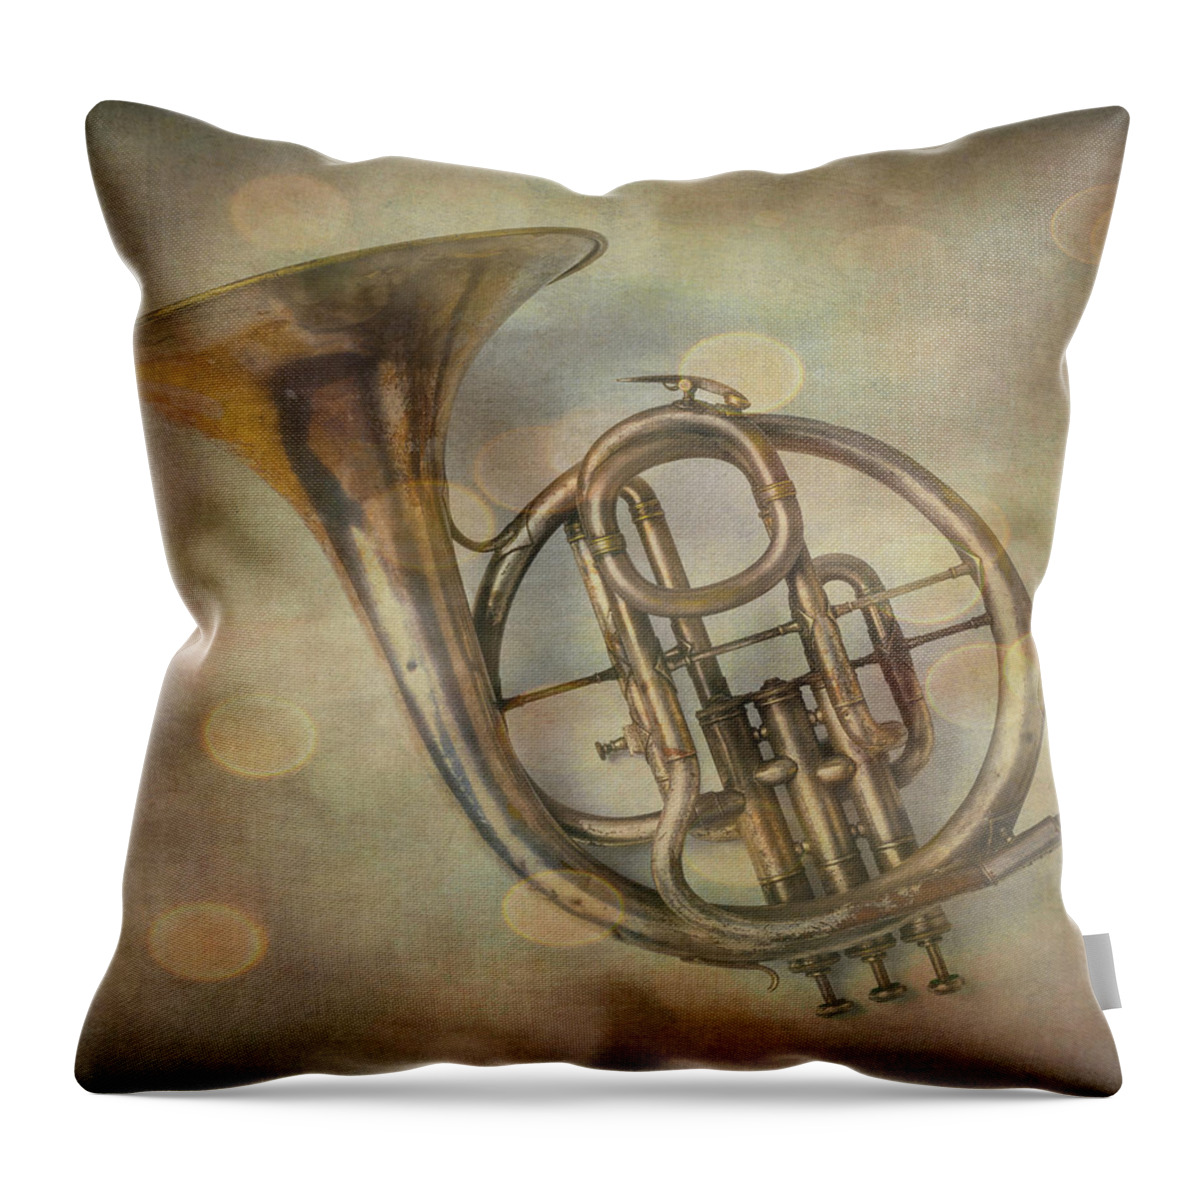 French Throw Pillow featuring the photograph Wonderful Old French Horn by Garry Gay